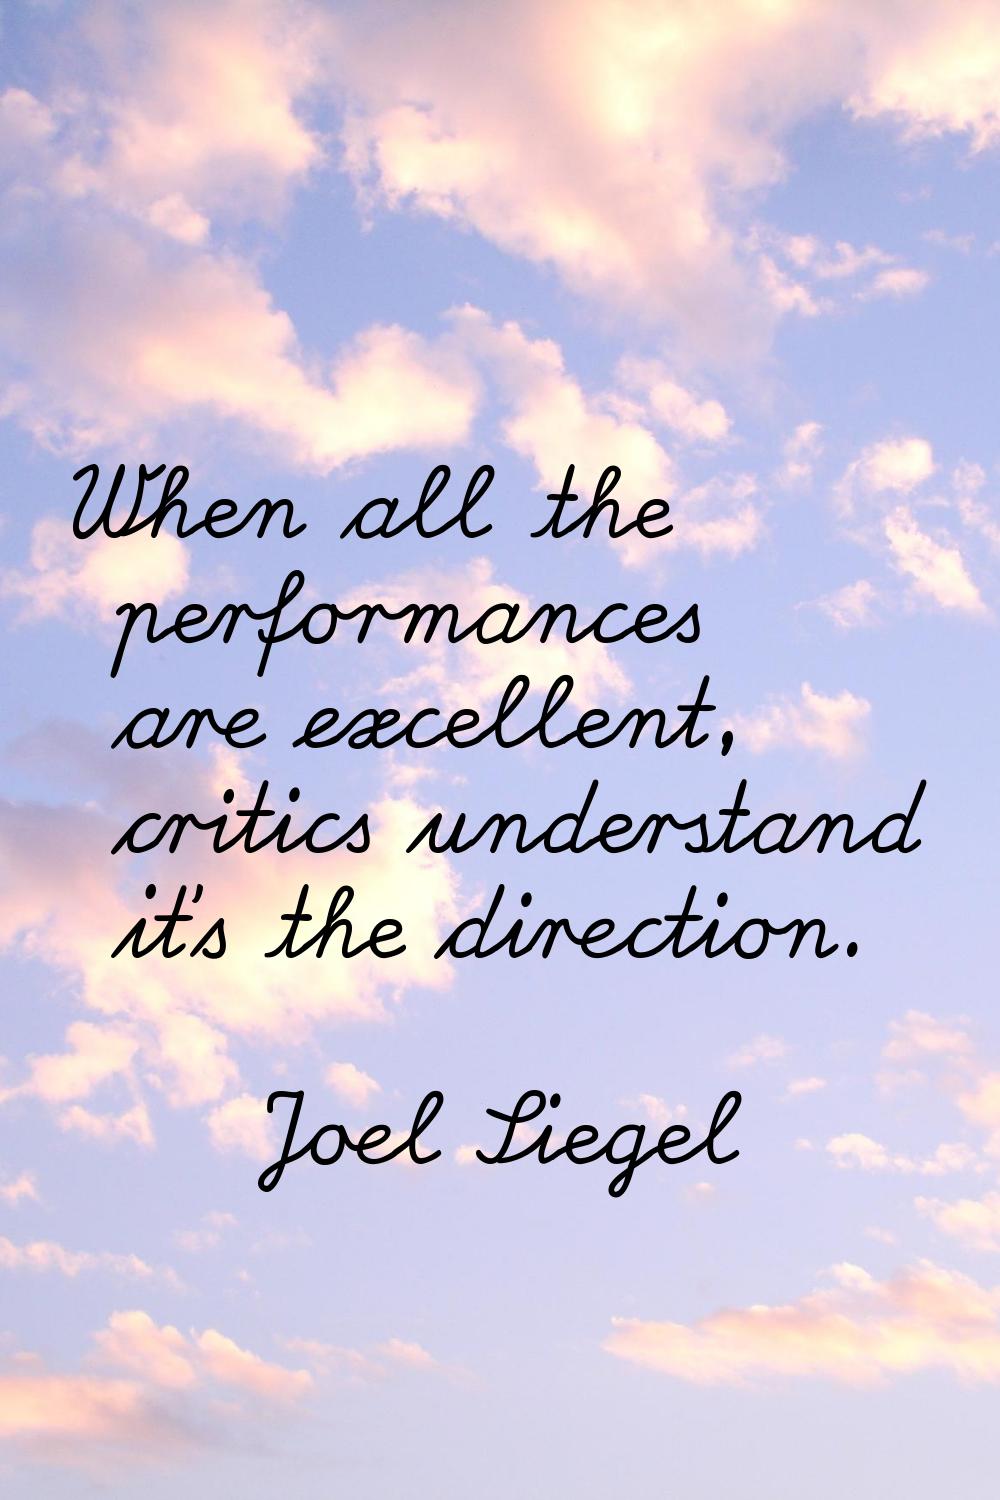 When all the performances are excellent, critics understand it's the direction.